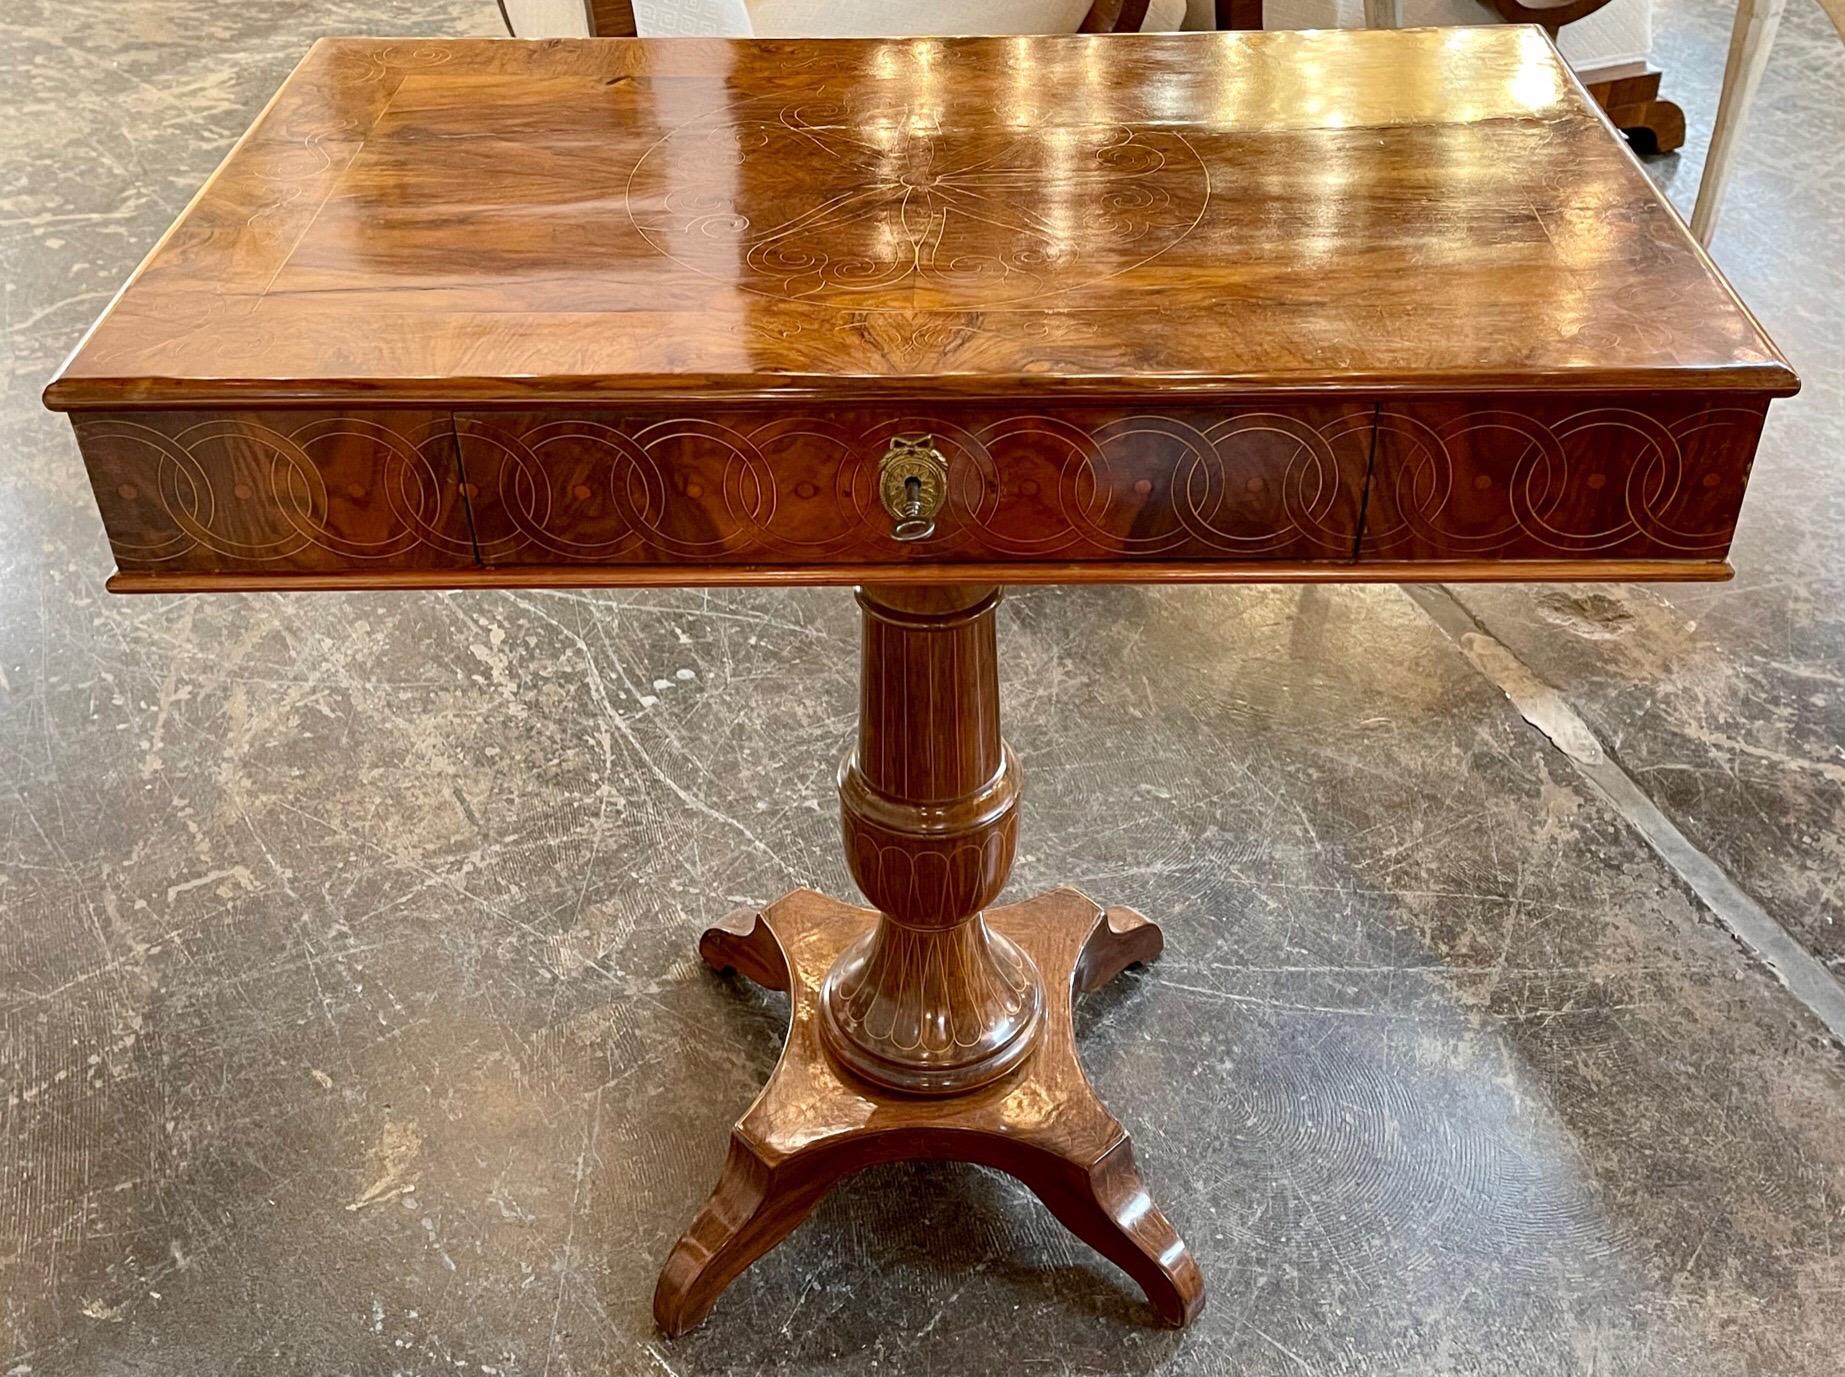 Handsome 19th century Northern Italian crotch mahogany side table. Beautiful flower pattern on the top of the table along with circular patterns along the edge of the table. Very special!